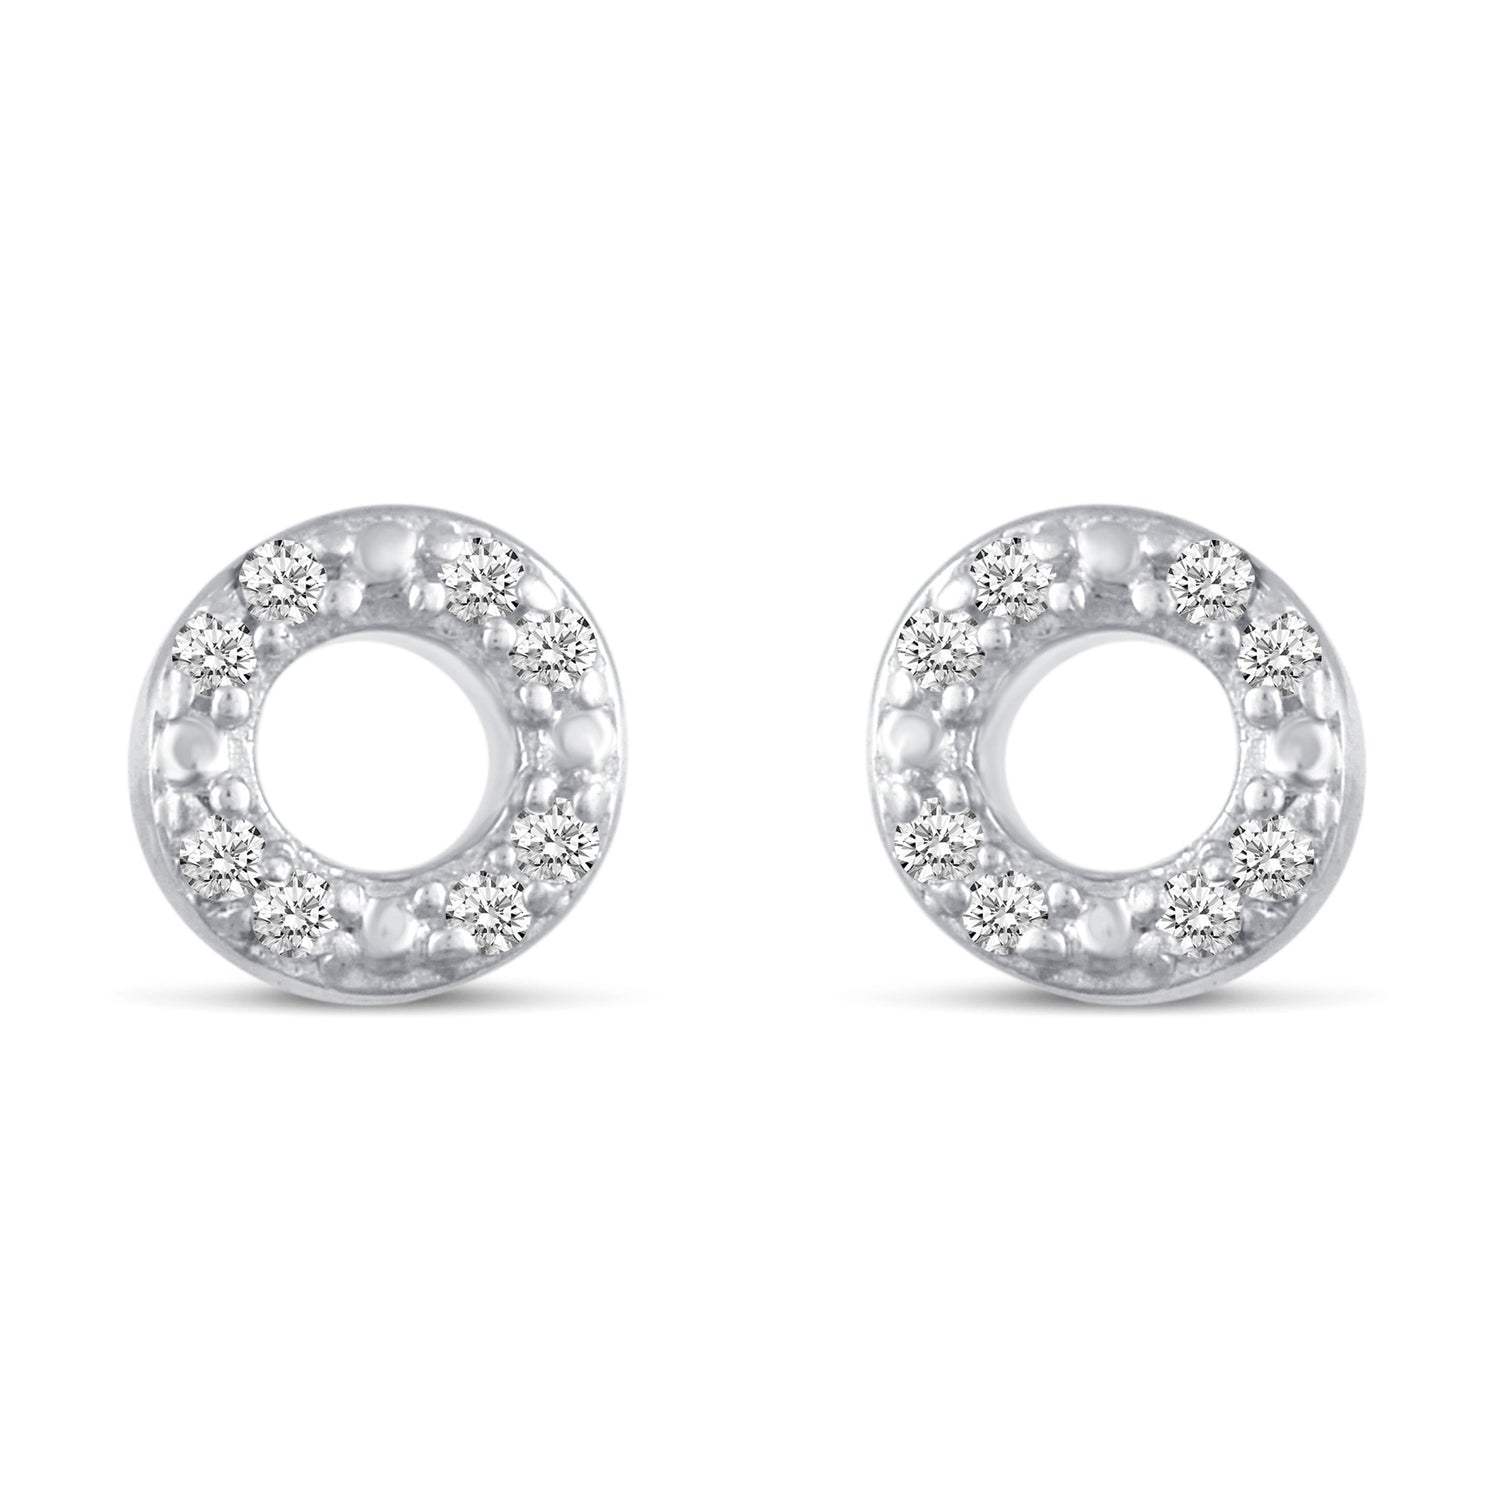 3 Pairs Set Ear Party 1/10 Cttw Natural Diamond Chevron Circle Diamond Shape Stud Earrings in 925 Sterling Silver